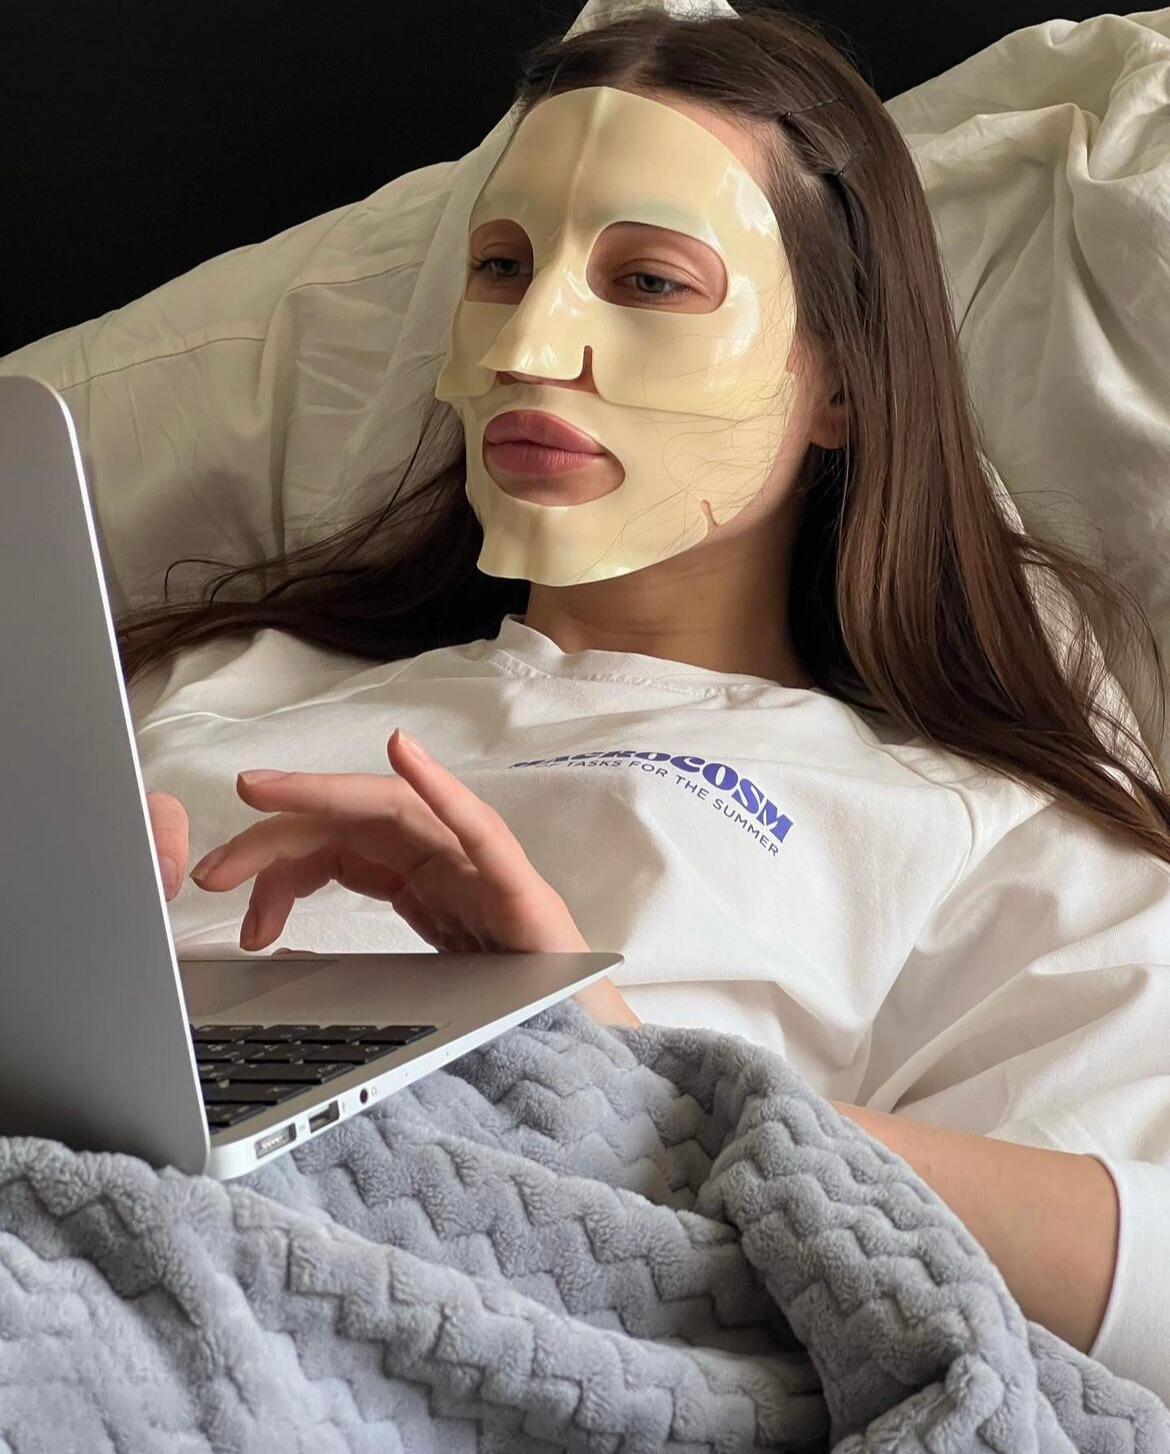 A woman wearing a jelly face mask working on her laptop.